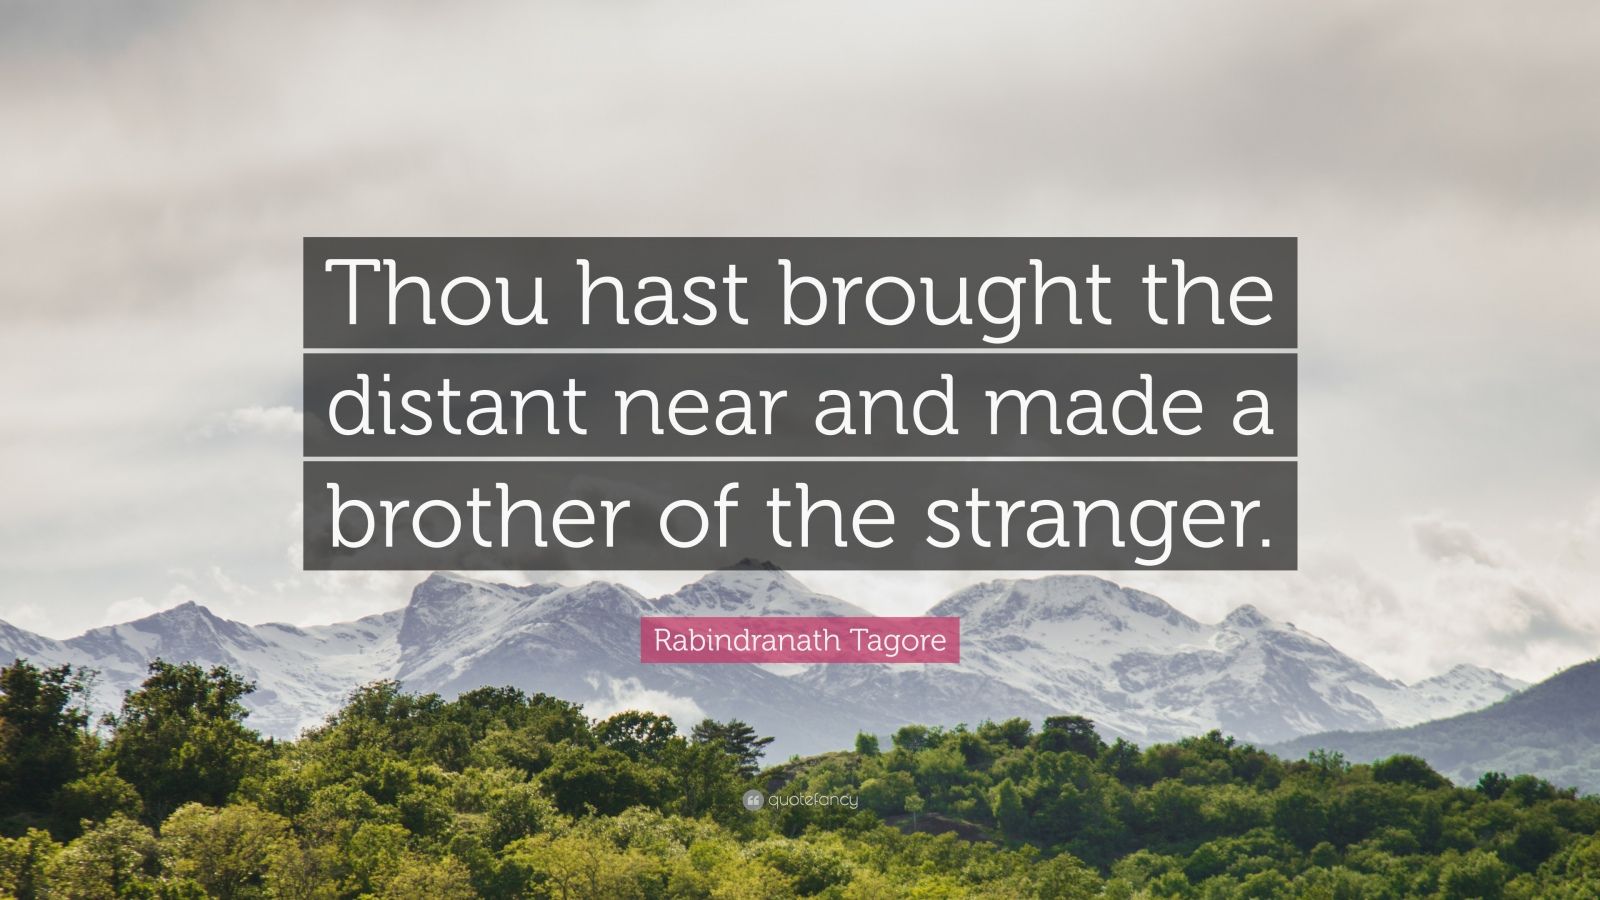 Rabindranath Tagore Quote: “Thou hast brought the distant near and made a  brother of the stranger.”